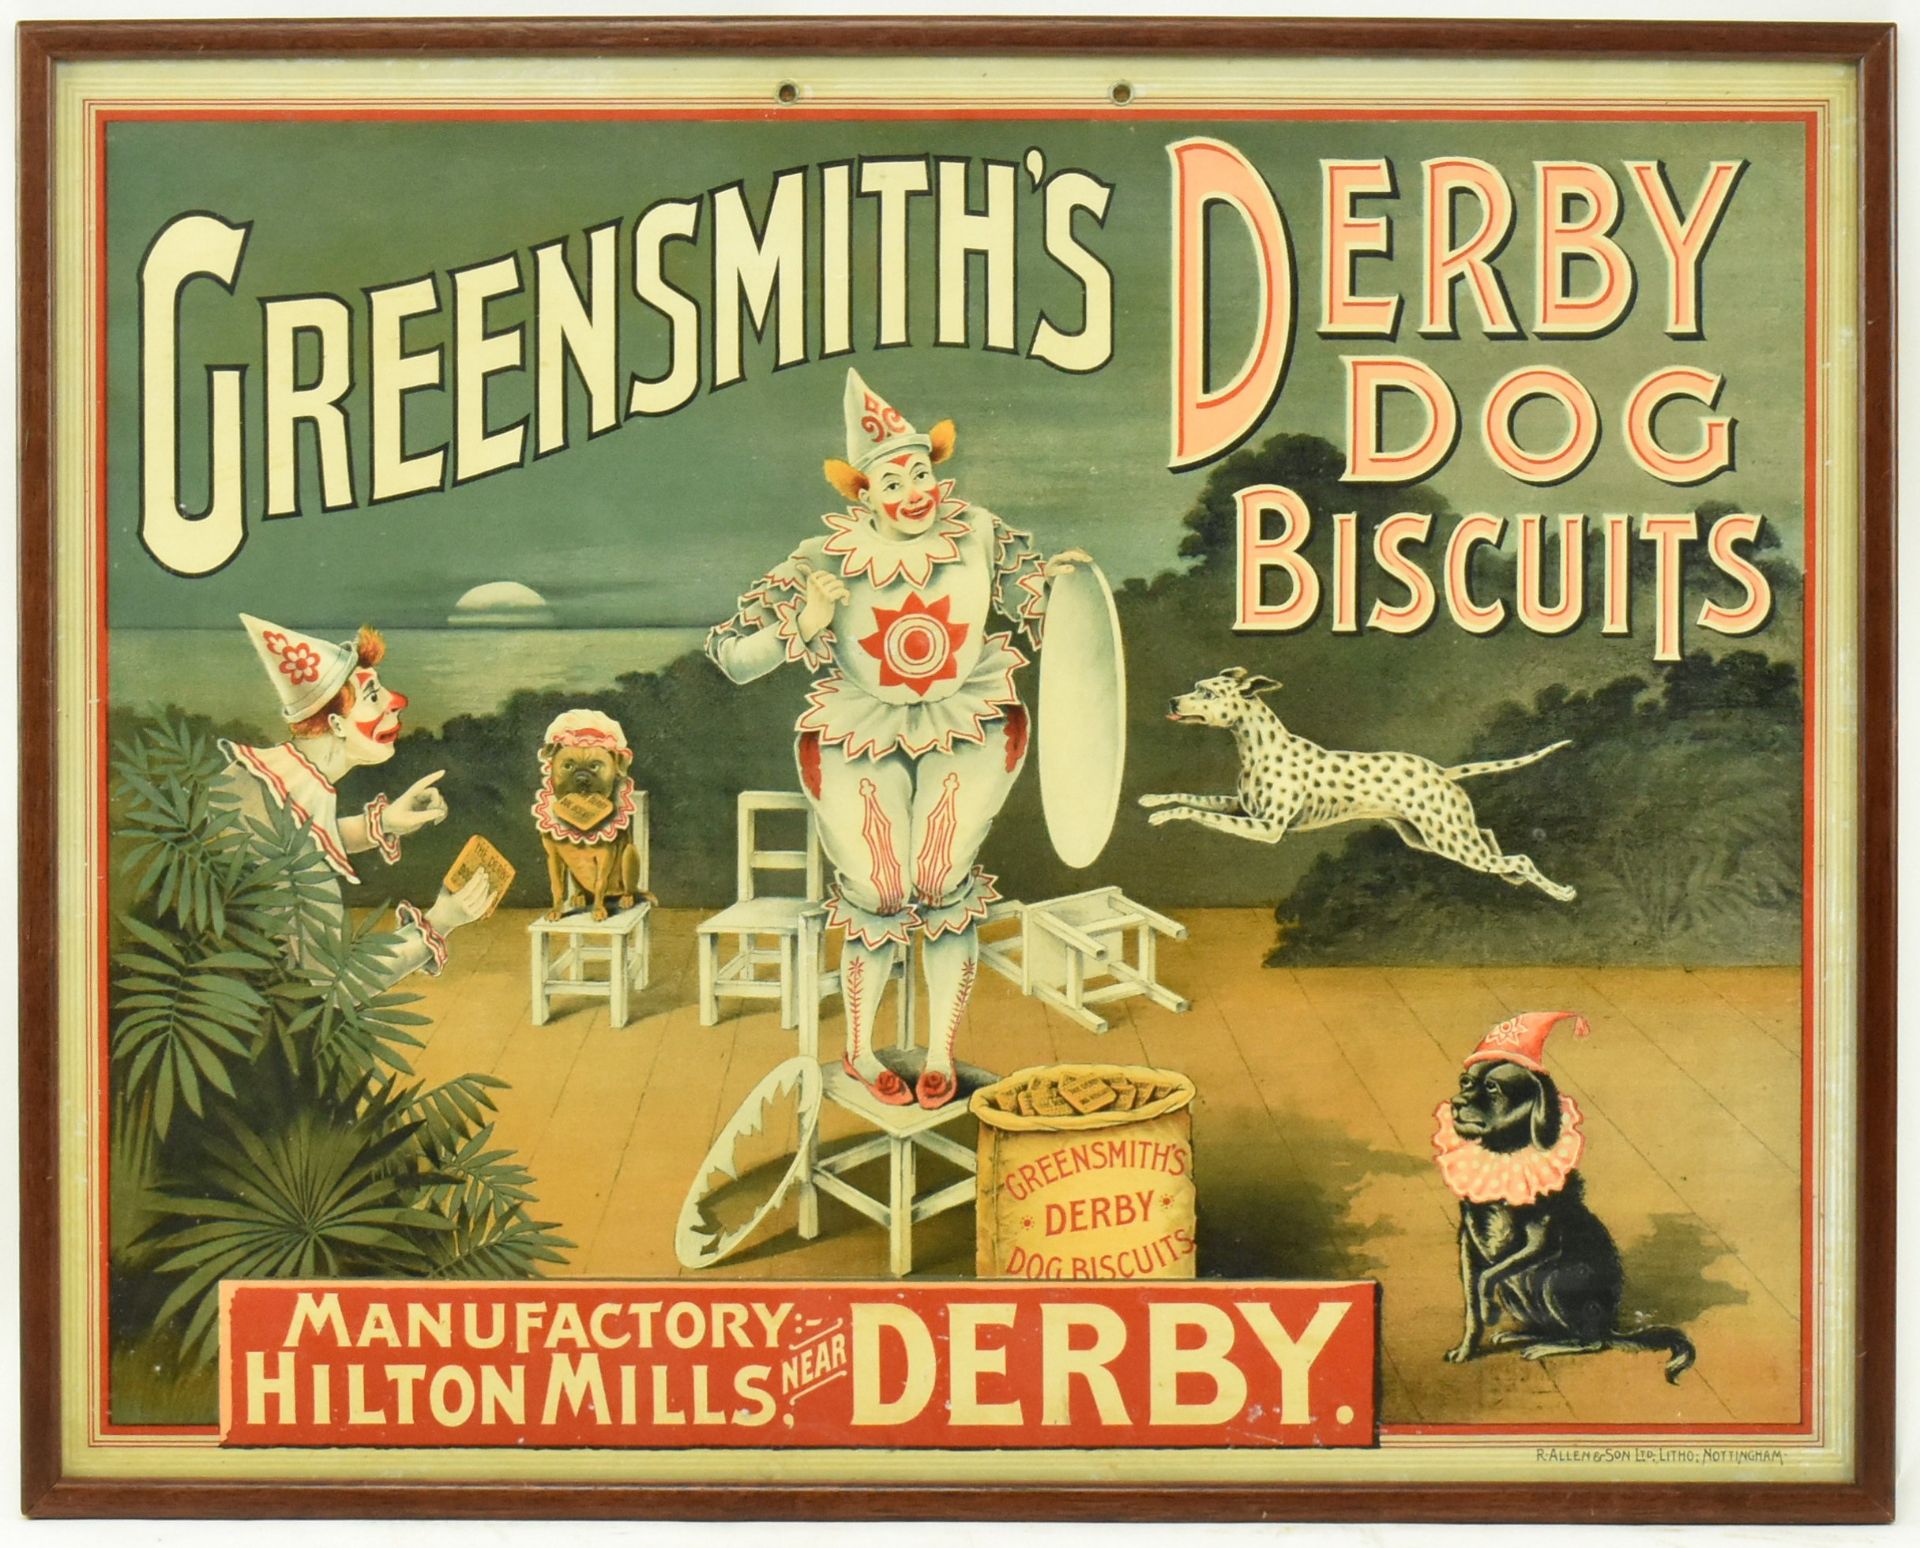 VINTAGE ADVERTISING - GREENSMITH'S DERBY DOG BISCUITS CARD - Image 2 of 7